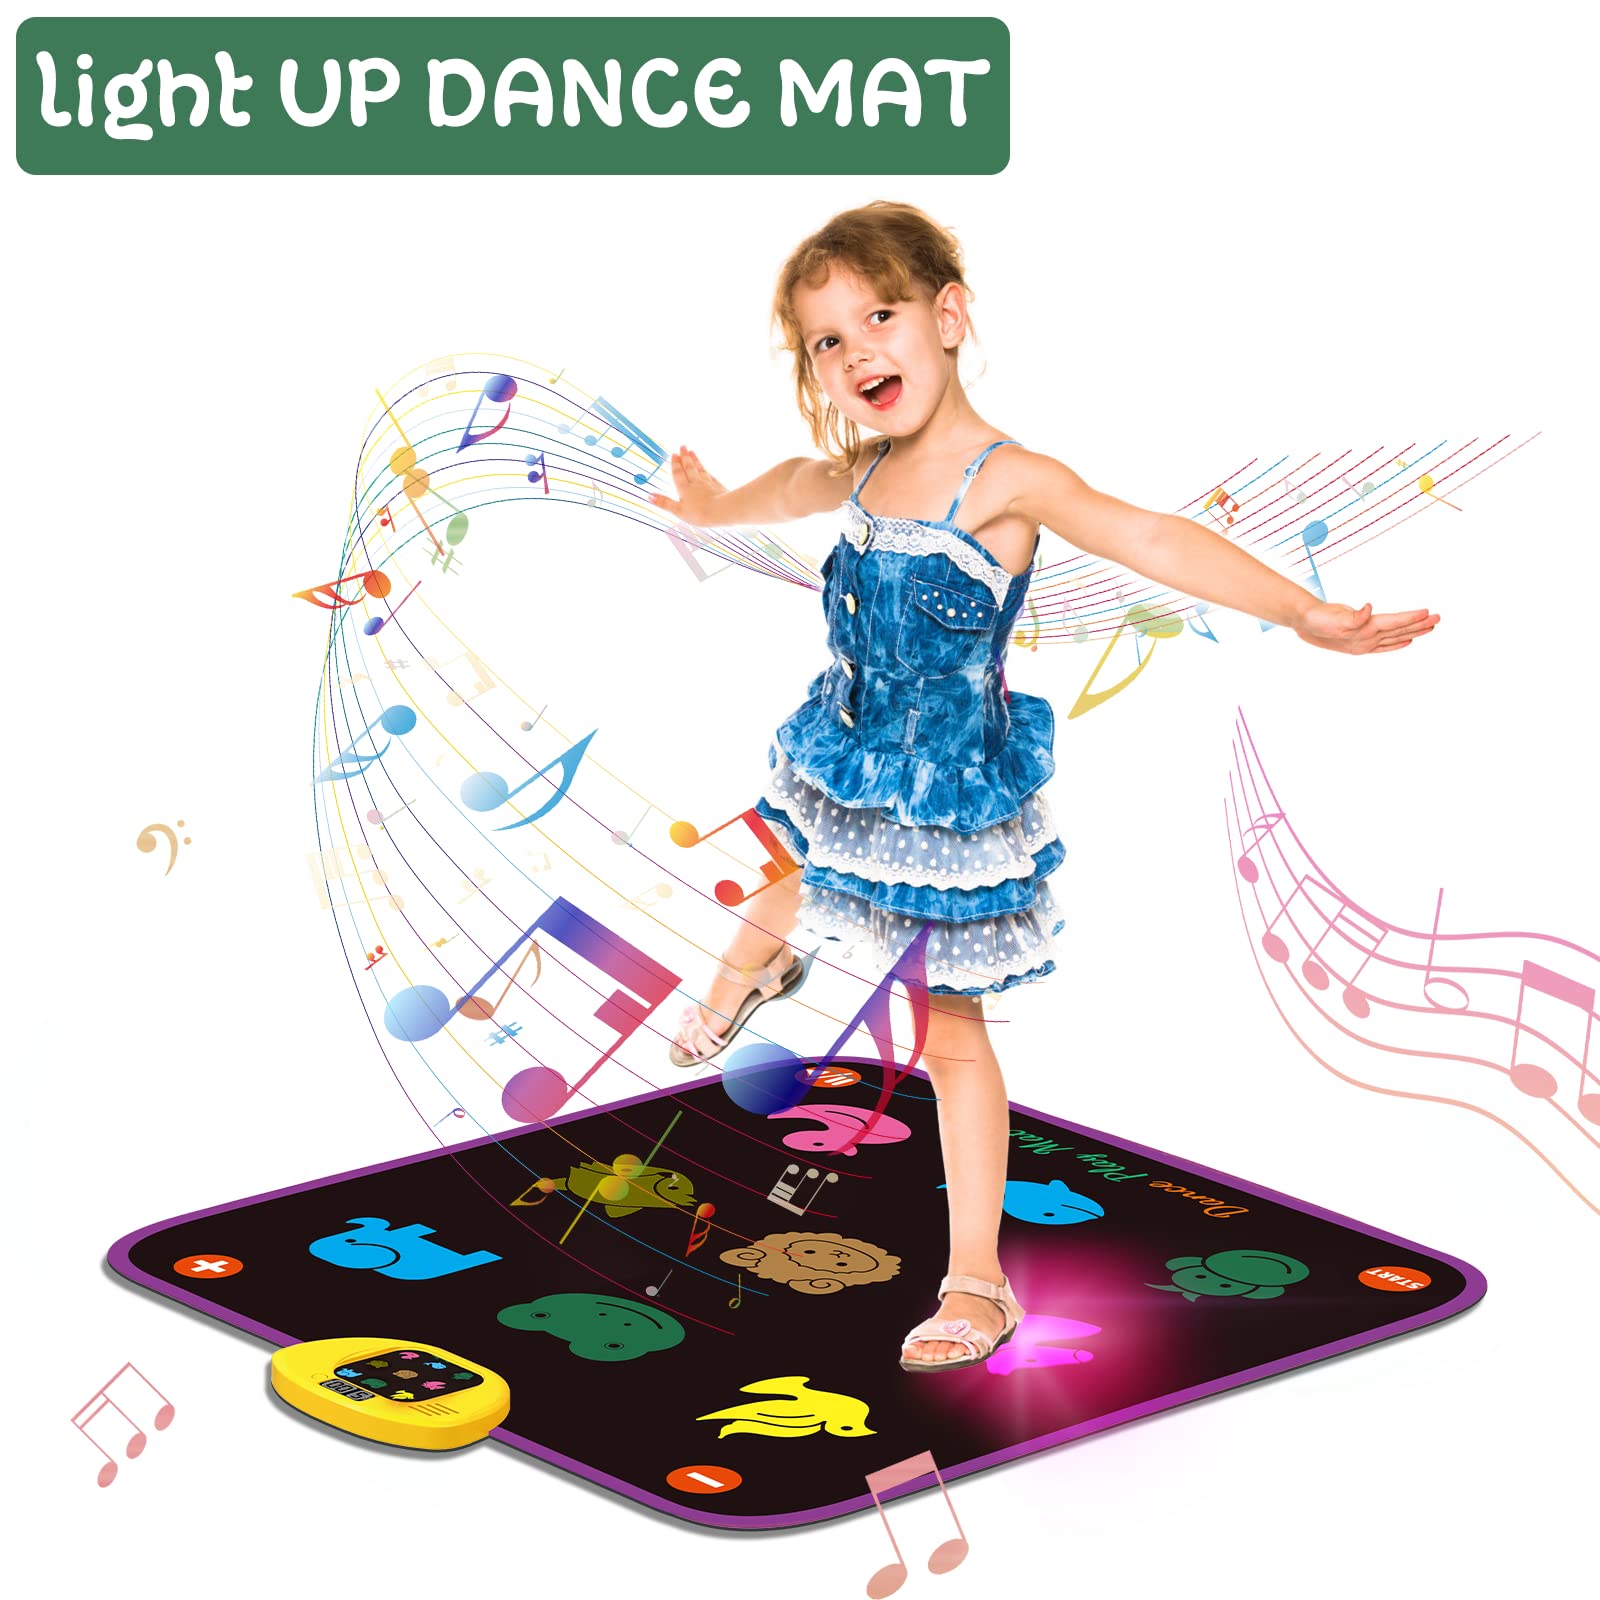 Luminous Dance Mat for Kids, Great Volume Control, Small Animal Dance Pad with 5 Gaming Modes, Large Size 35'' X 40'', Ideas Birthday Gifts for Age 5+ Year Old